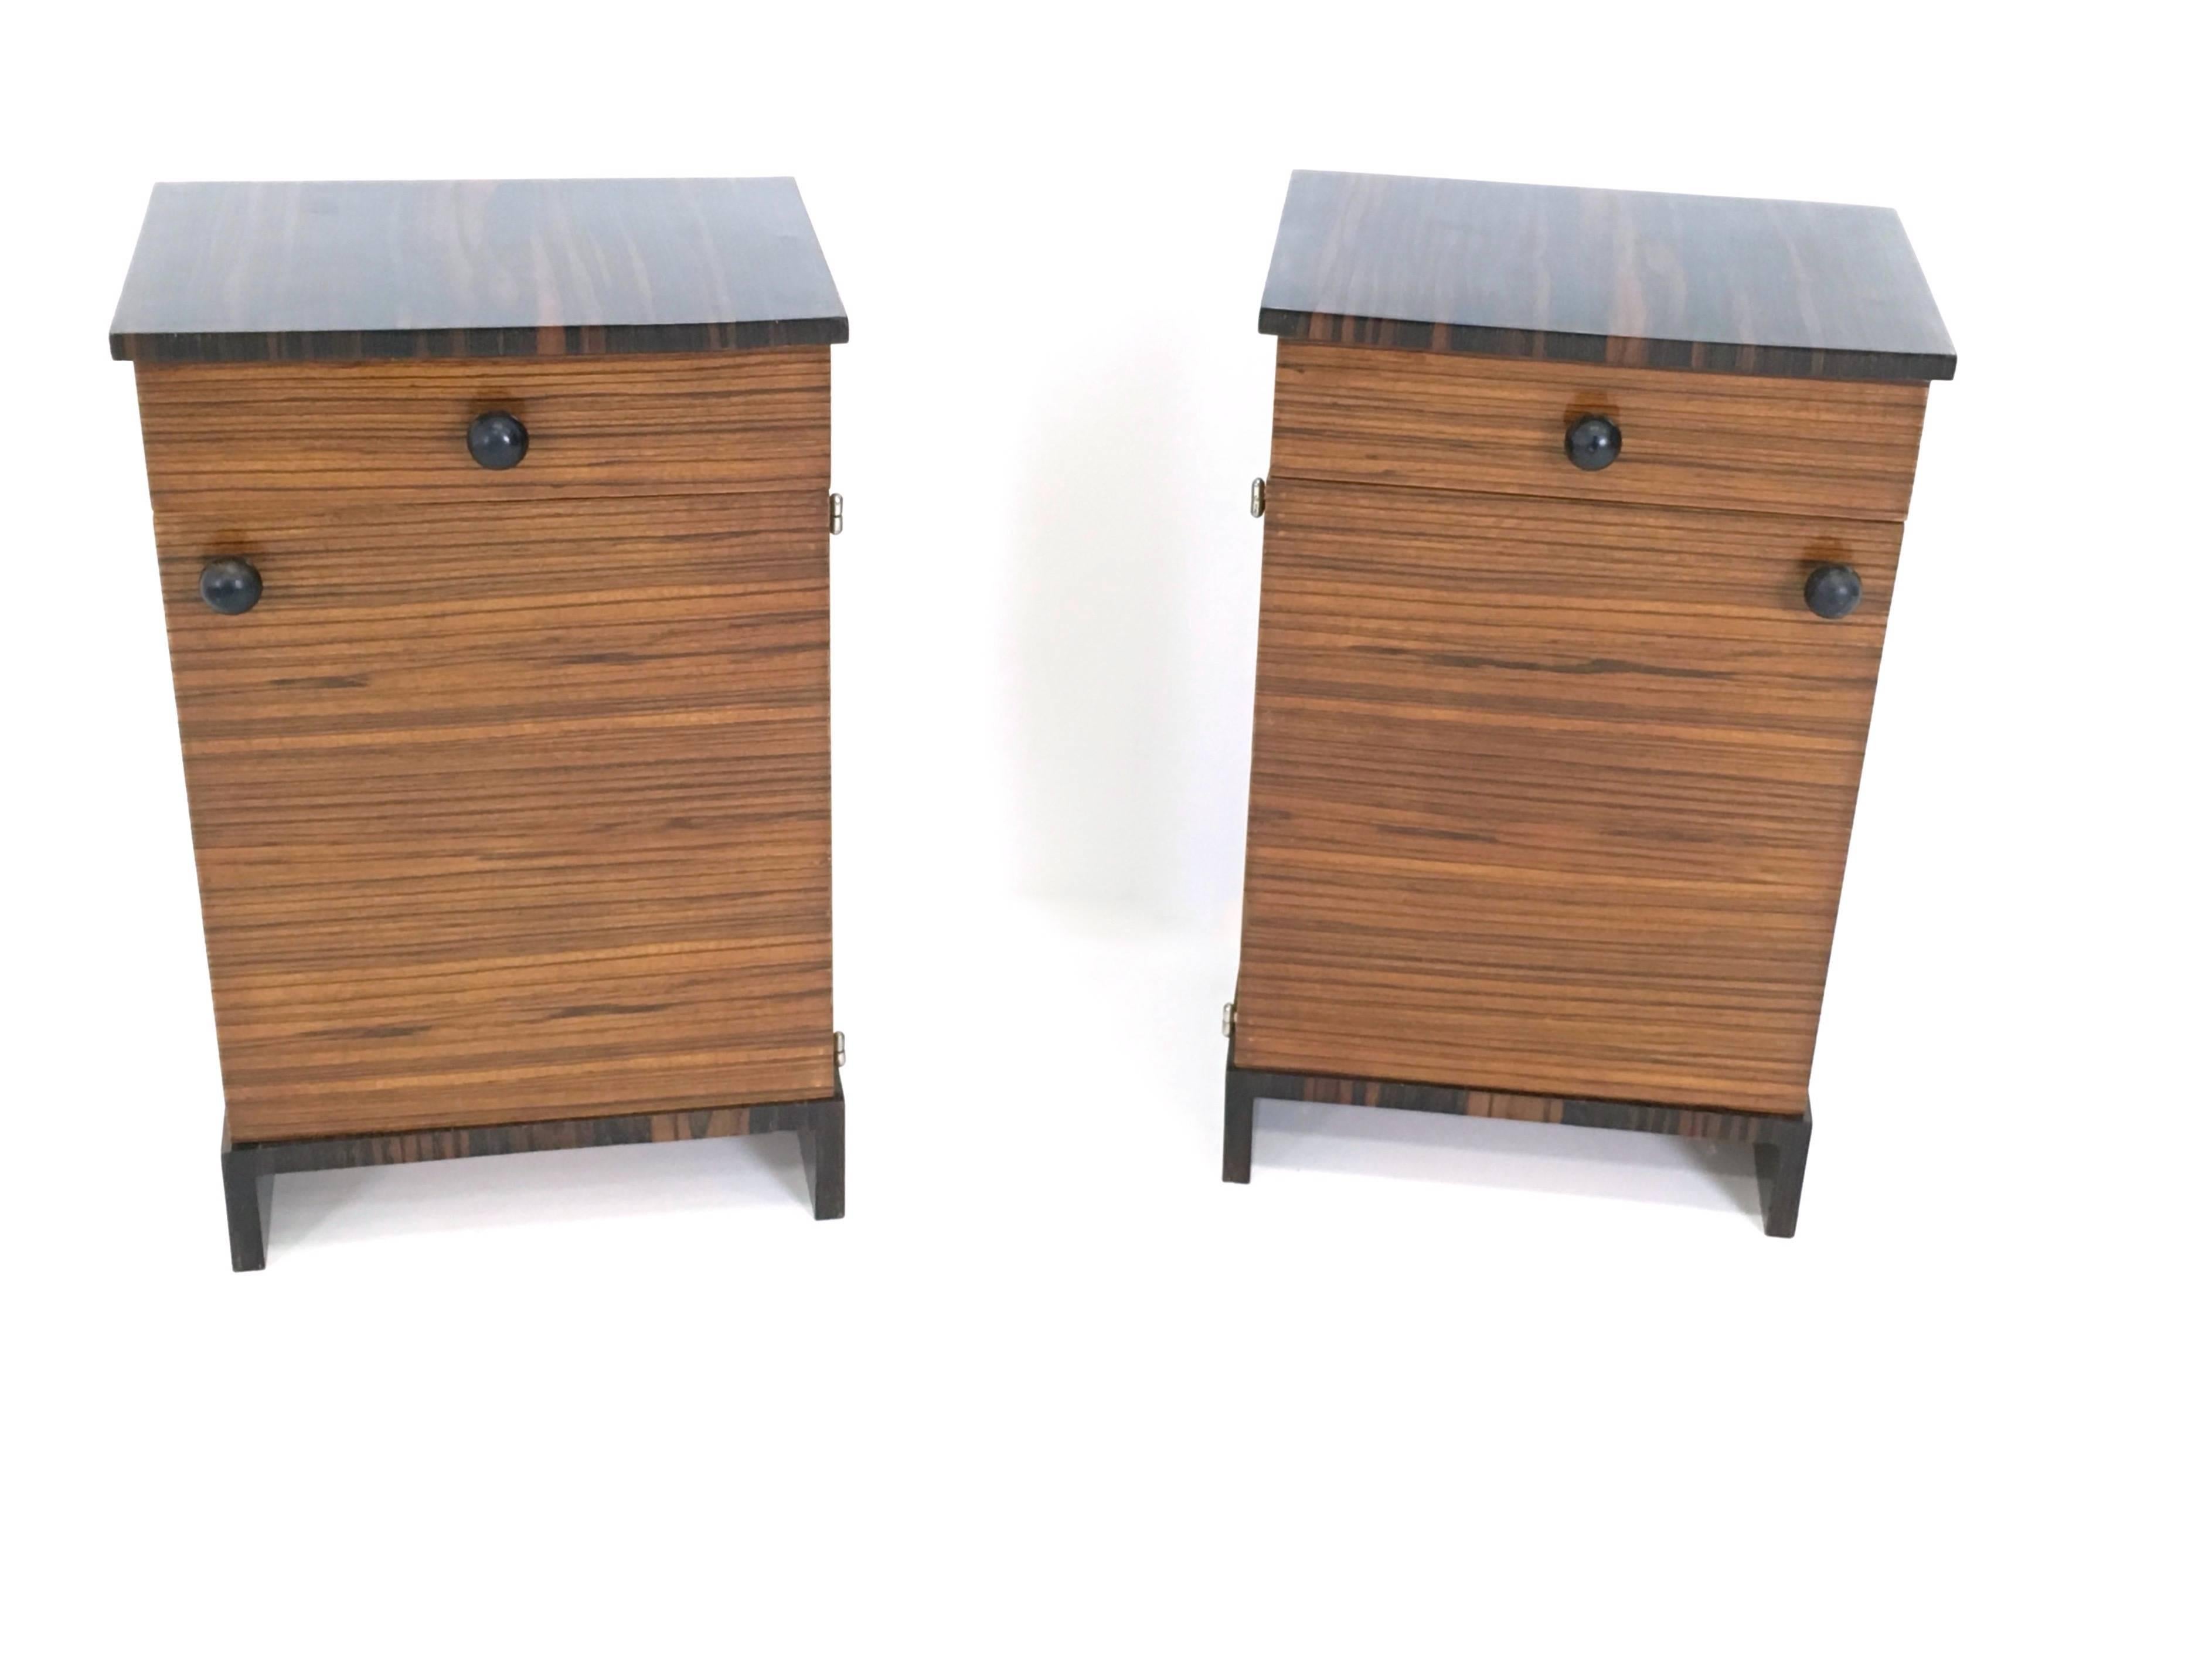 They are made from zebrawood and Macassar ebony.
They have been perfectly polished with shellac and are in such perfect condition that they are ready to become a piece in the home.